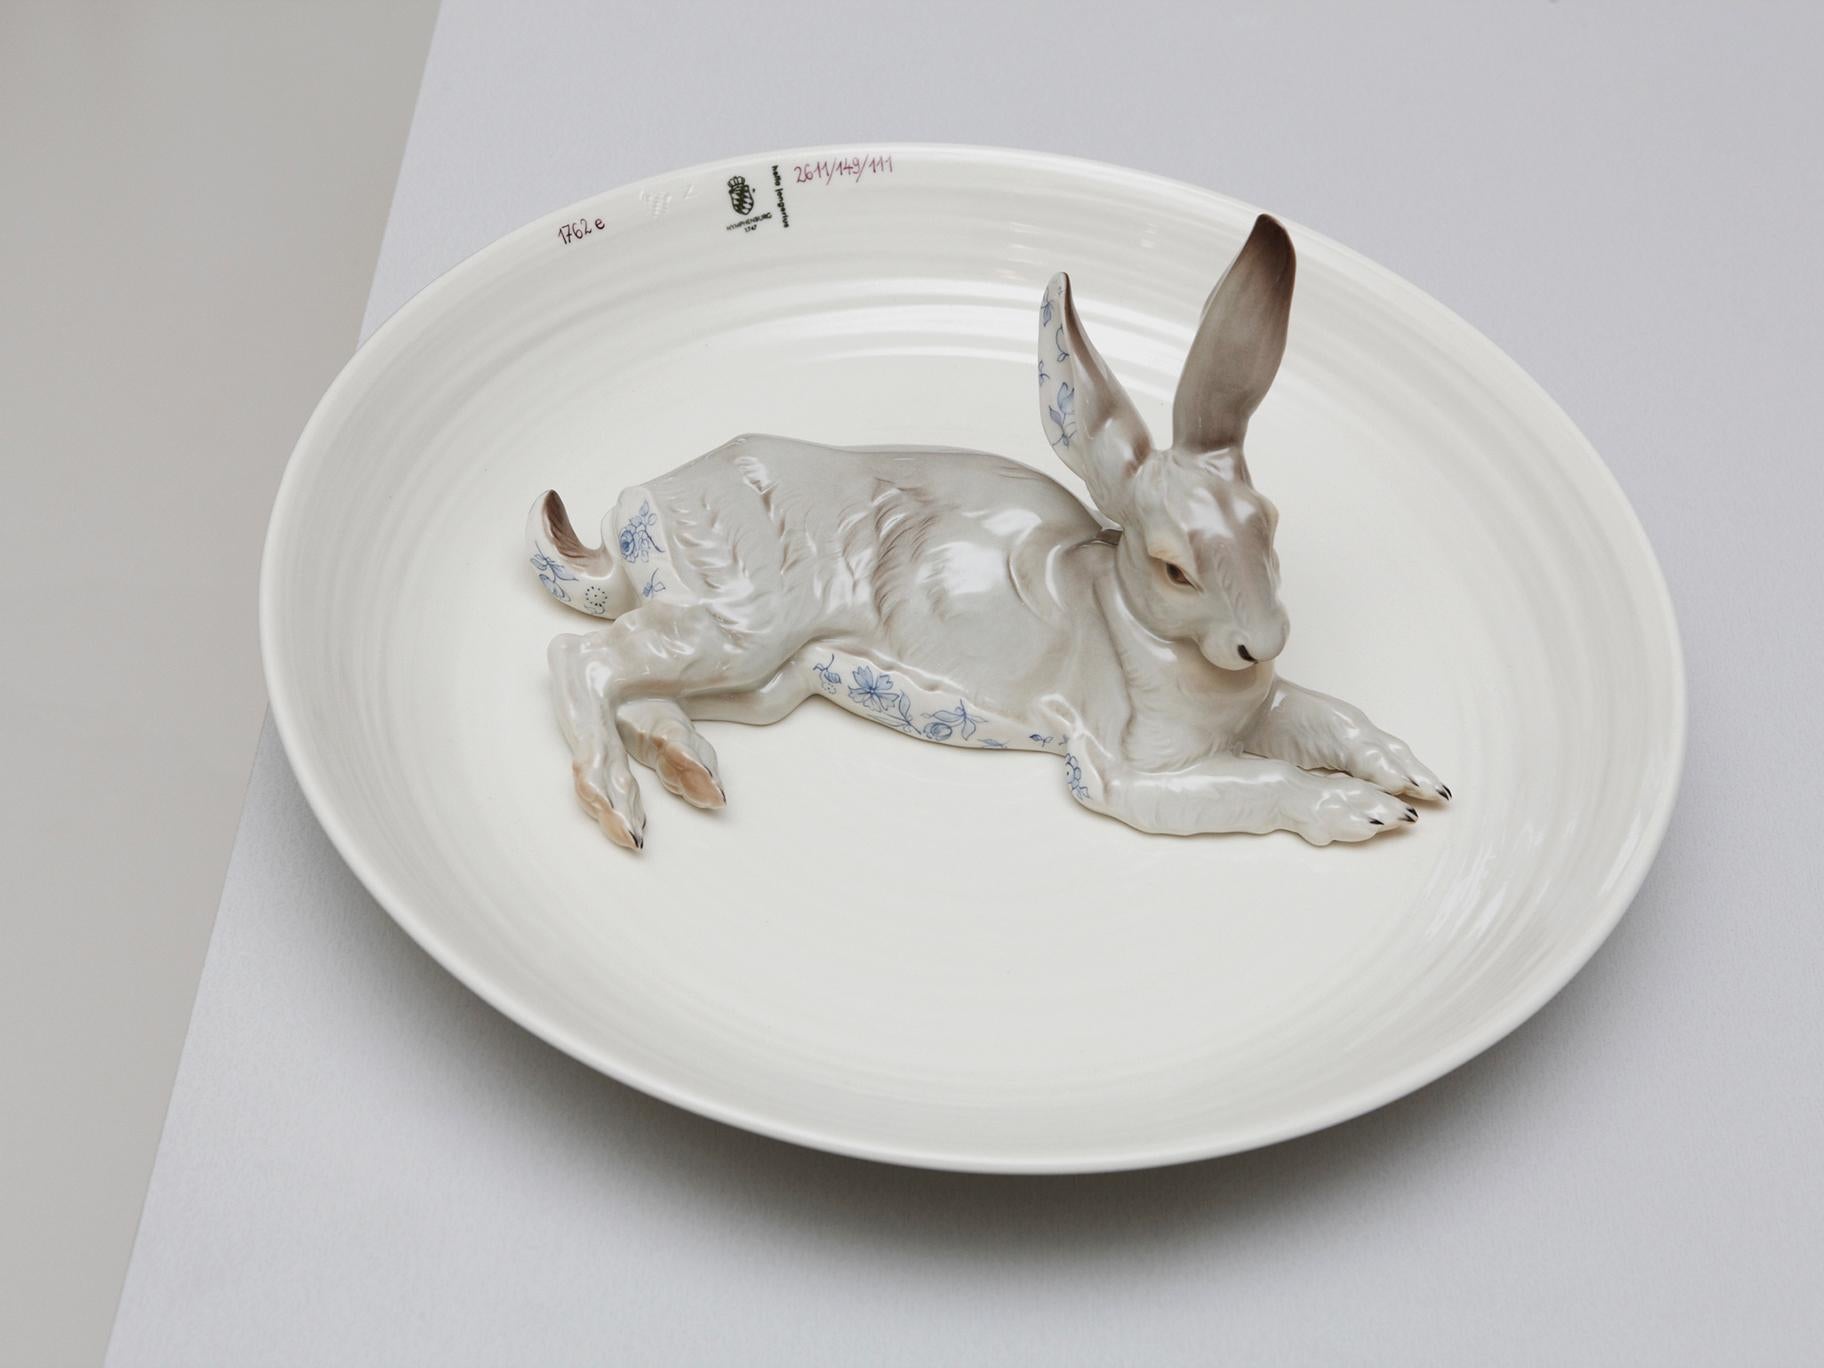 This is one of a series of animal bowls designed for Nymphenburg Porcelain Manufactory by Hella Jongerius. The large bowl with a rabbit adorned in a blue floral pattern is the perfect object of discussion. As a decorative object, a fruit bowl or as